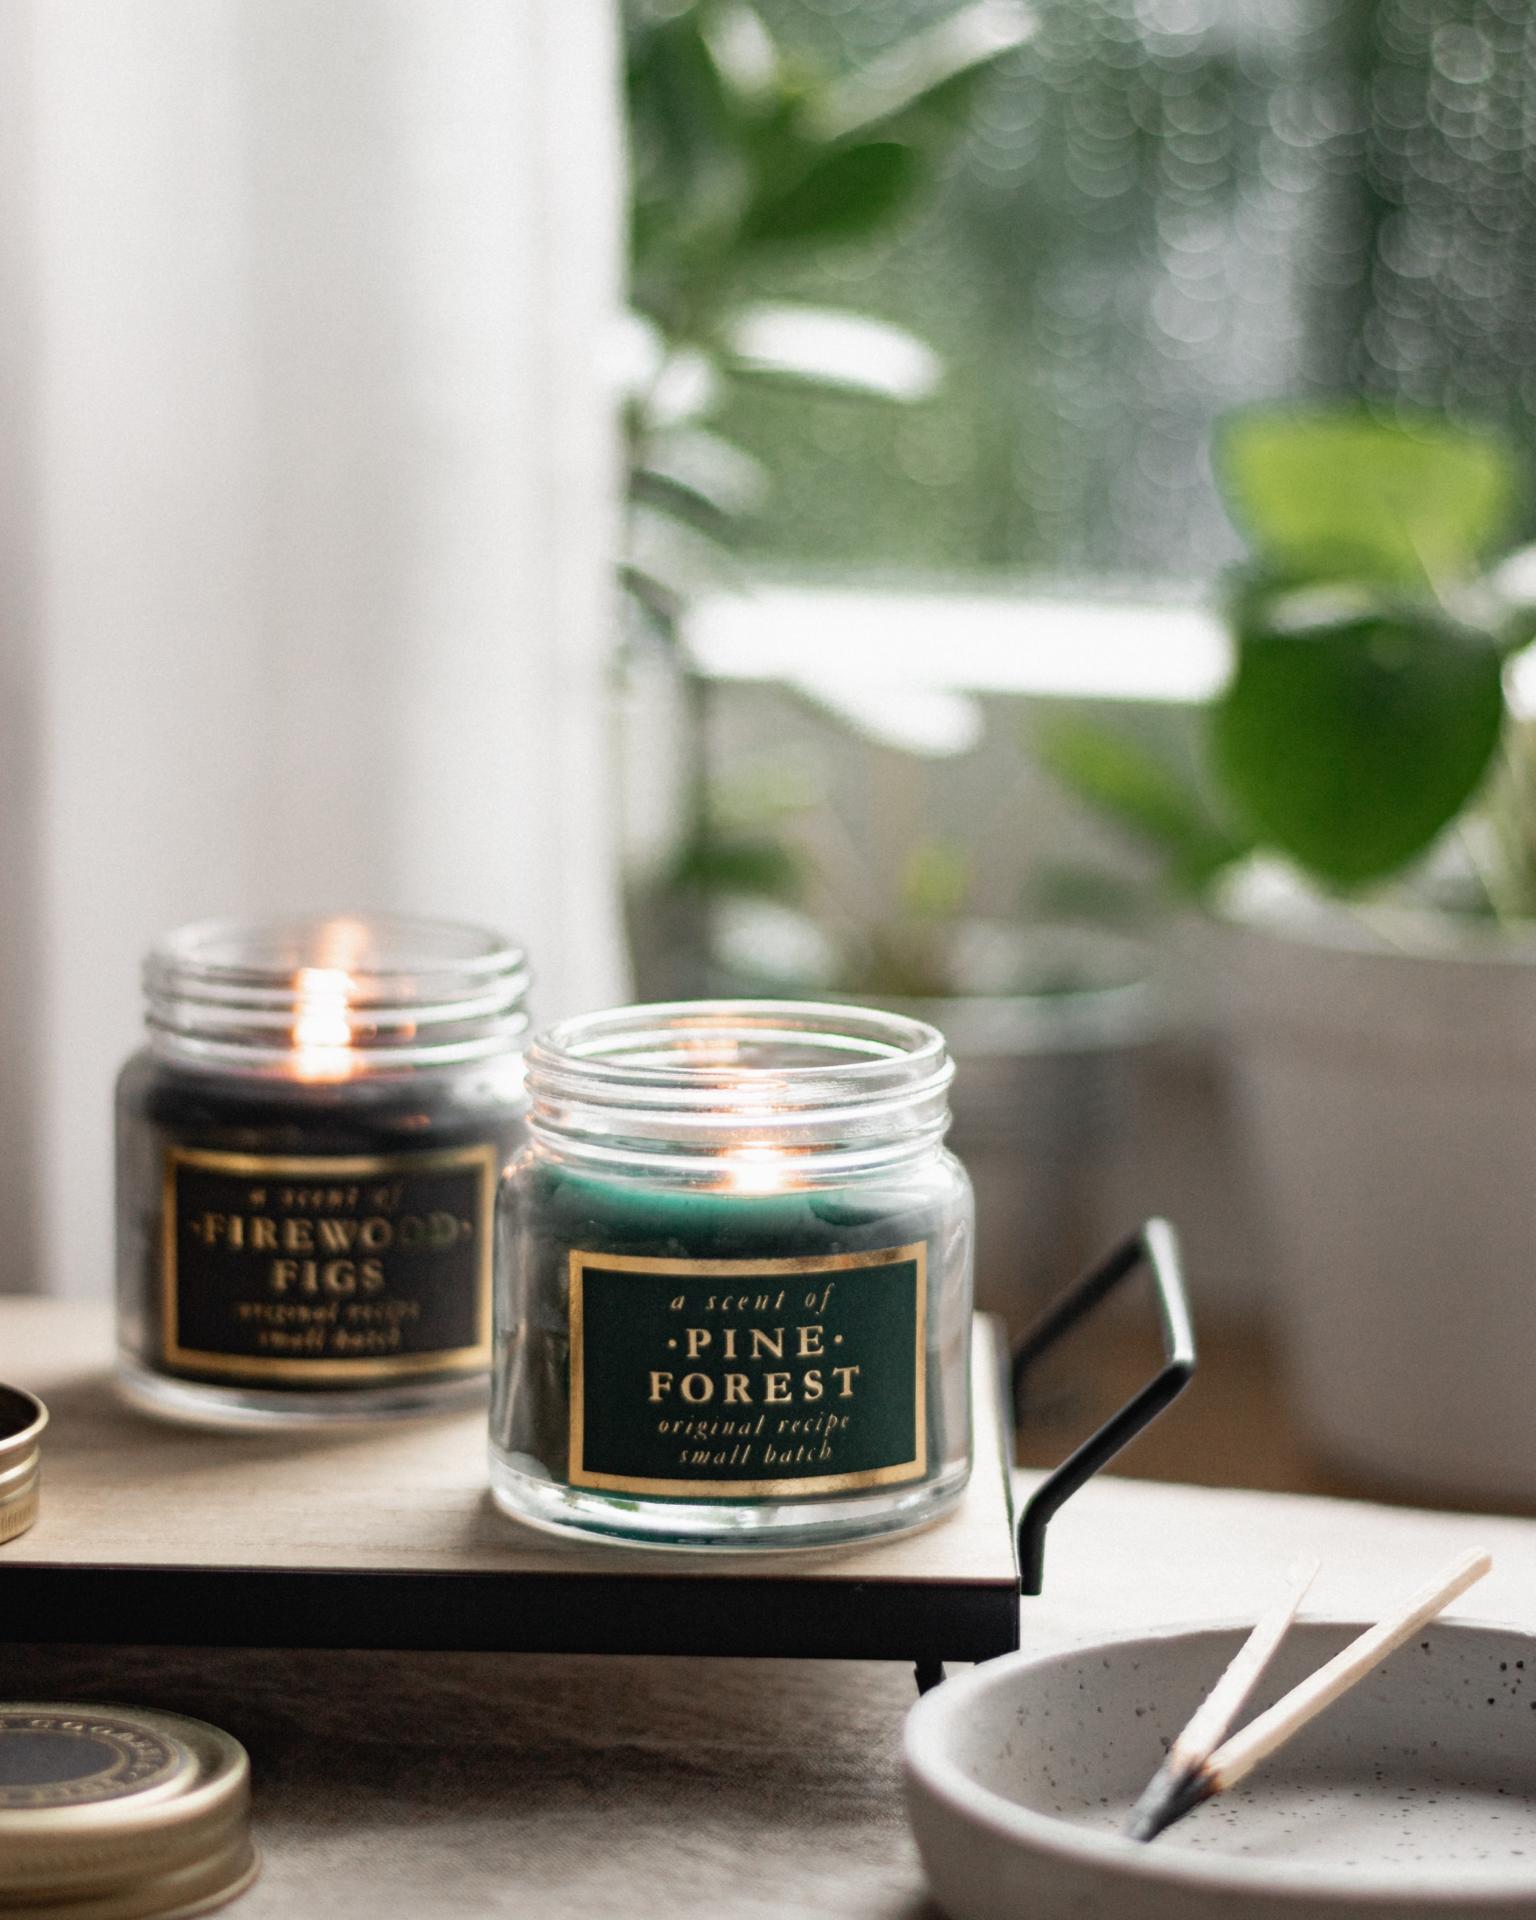 single wick green pine forest and firewood candles on tray by window